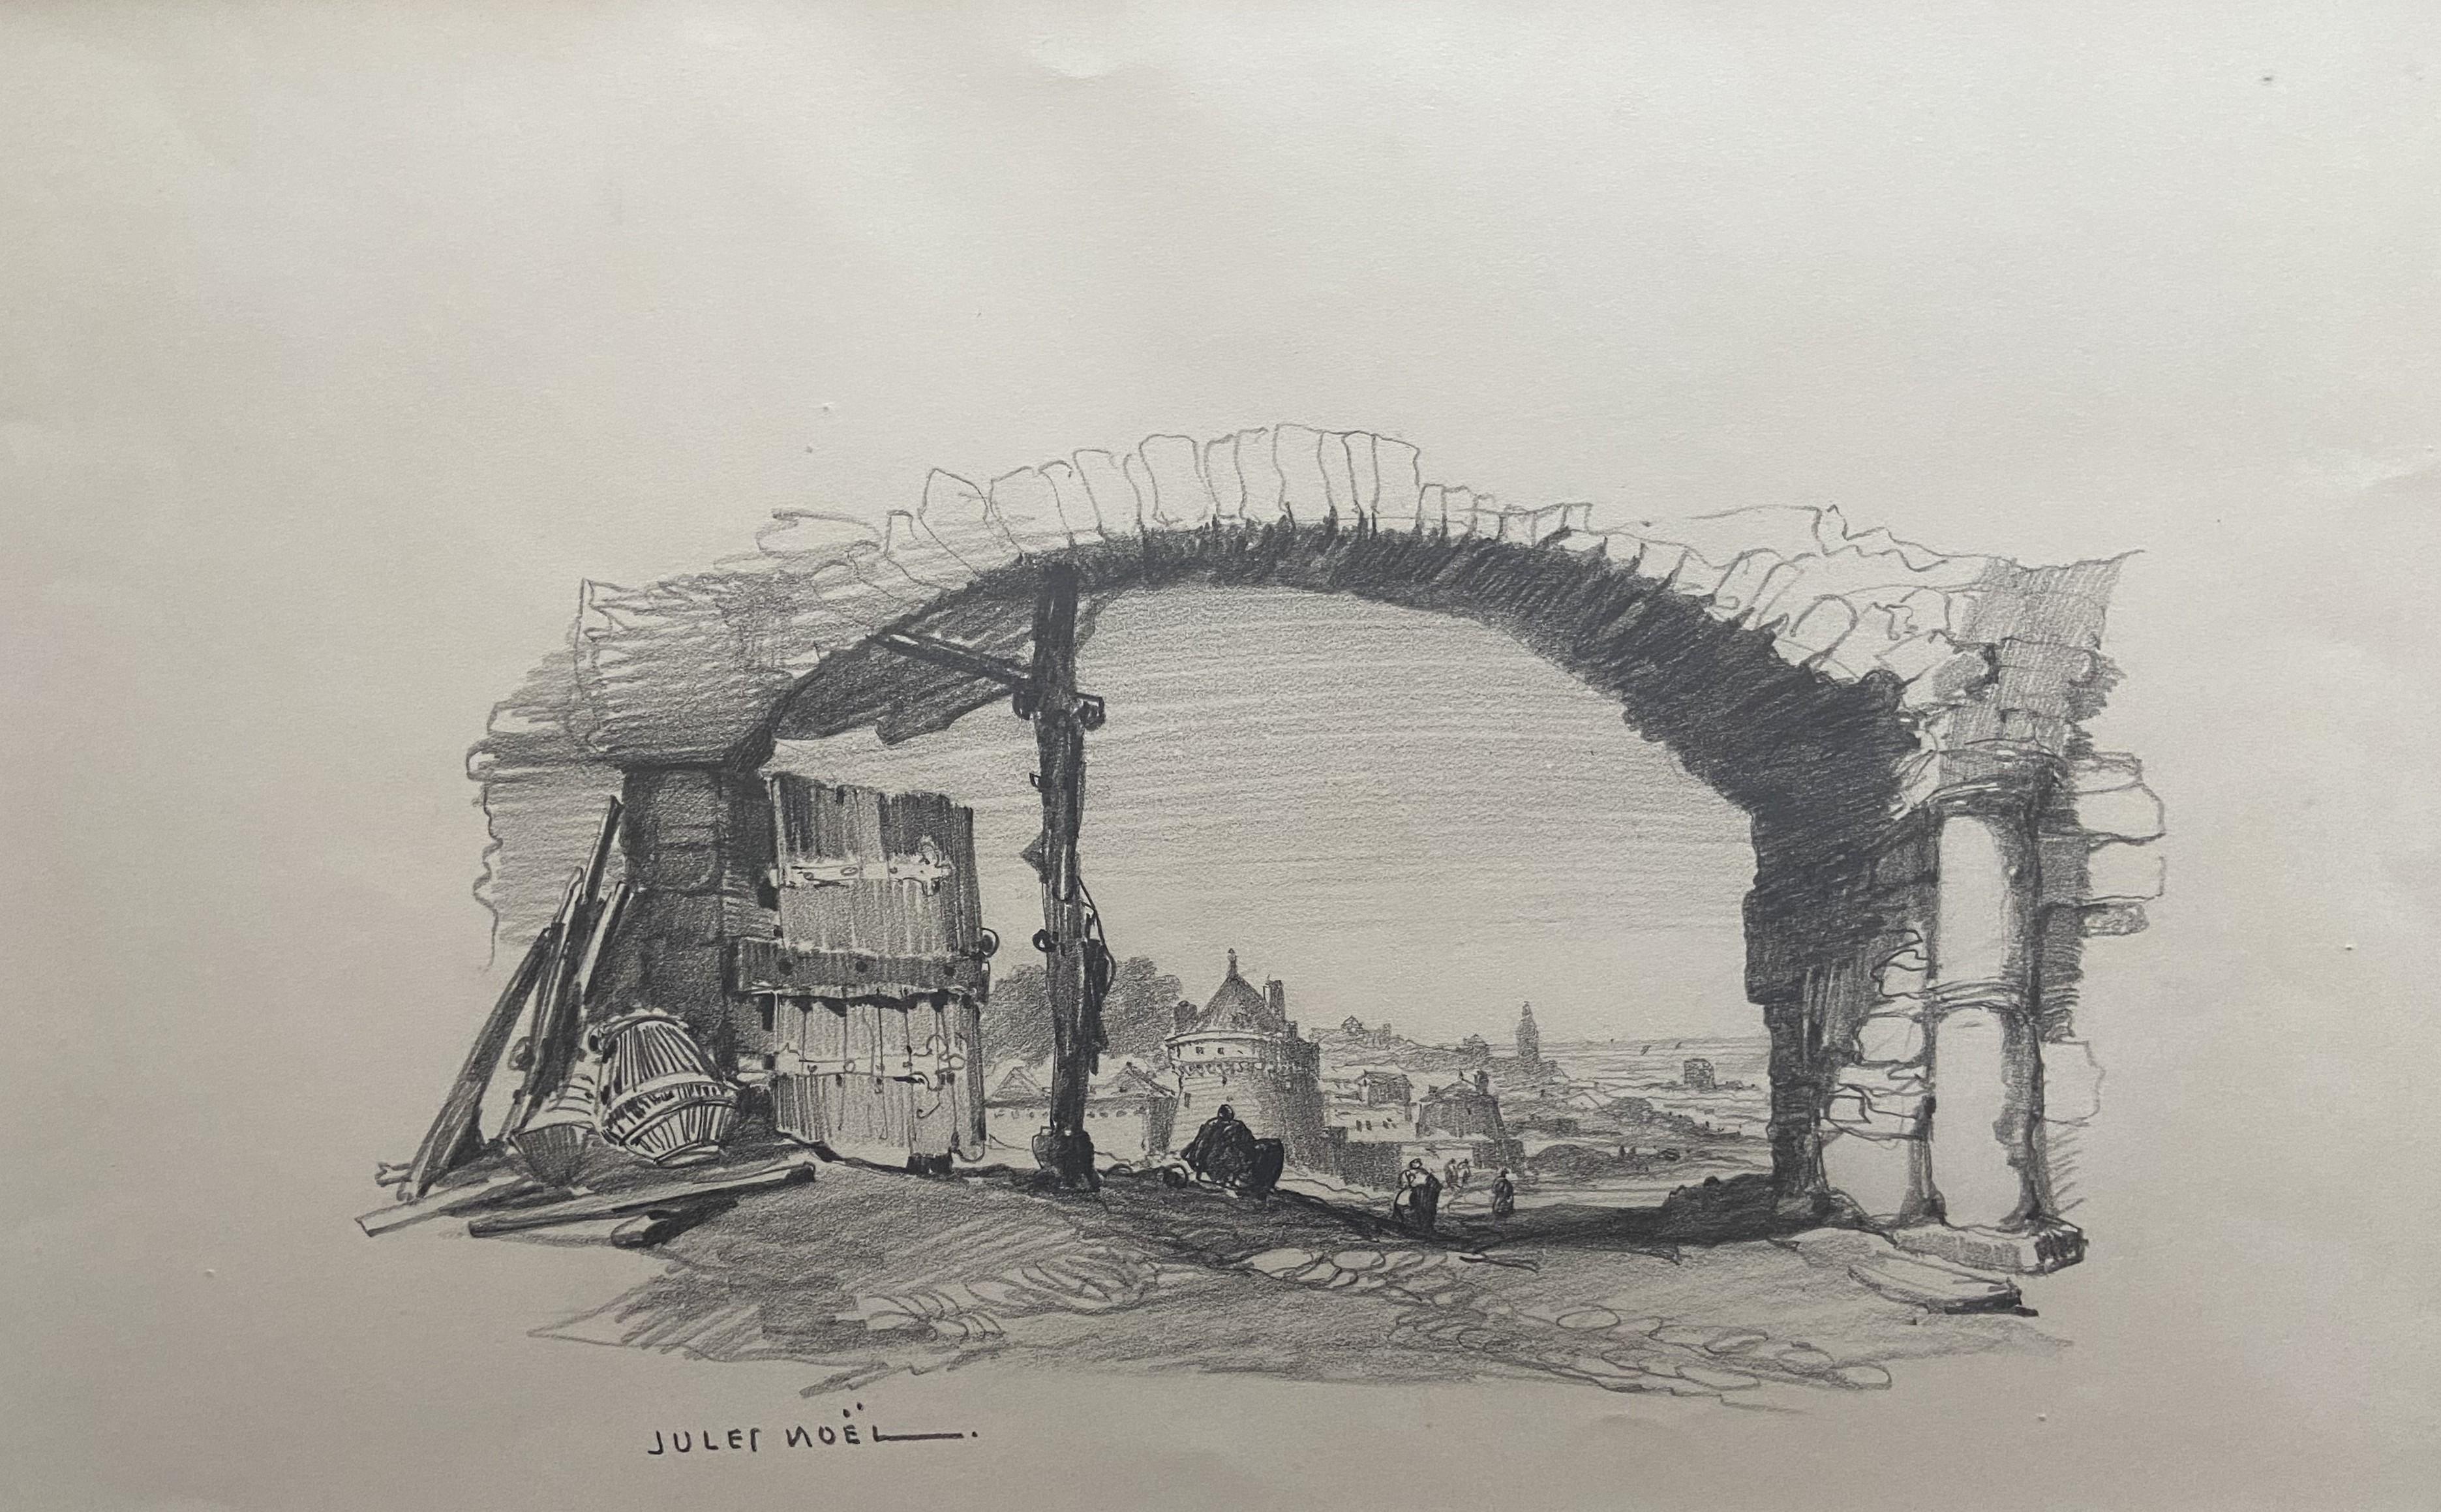 Jules Noel (1810-1881) 
iew of a city under an arch
Signed lower left
Pencil on paper
27.8 x 44.5 cm
Framed under glass : 43 x 59.5 cm

The composition of this drawing is particularly interesting with the framing of the distant view of this city by